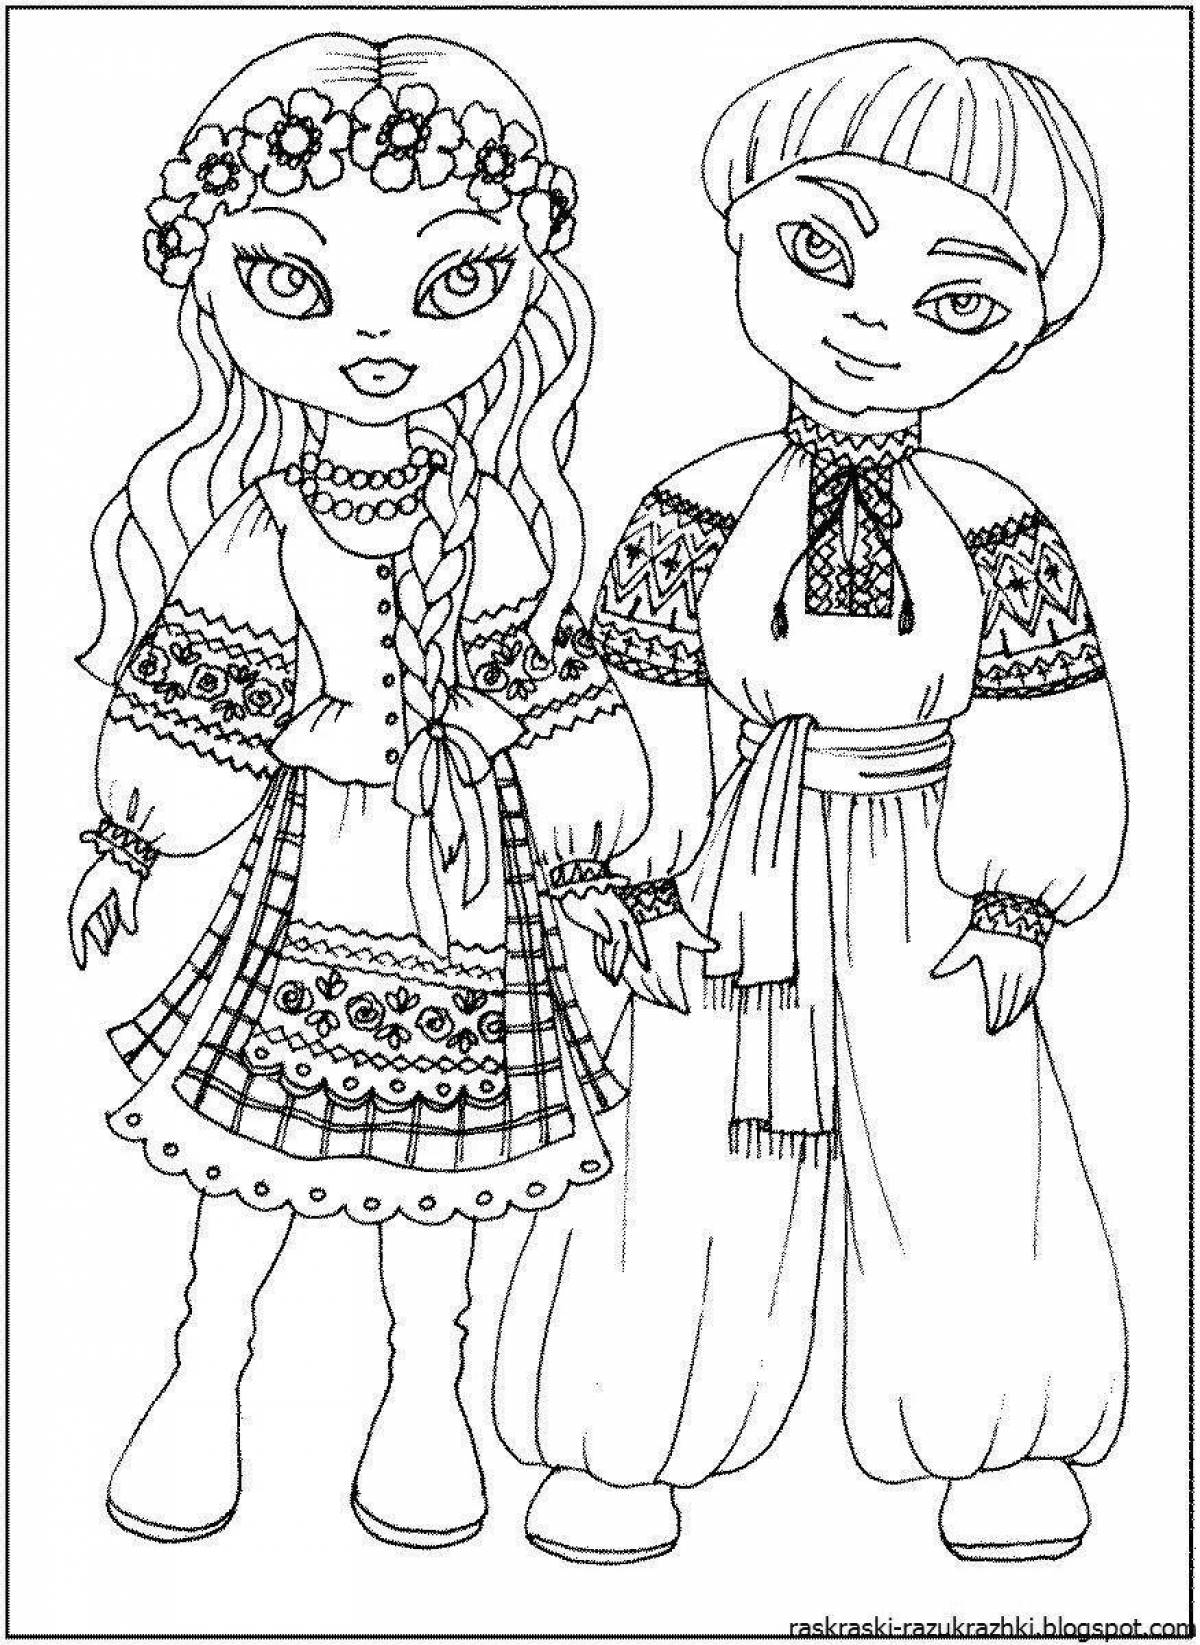 Coloring book modern belarusian clothes for children